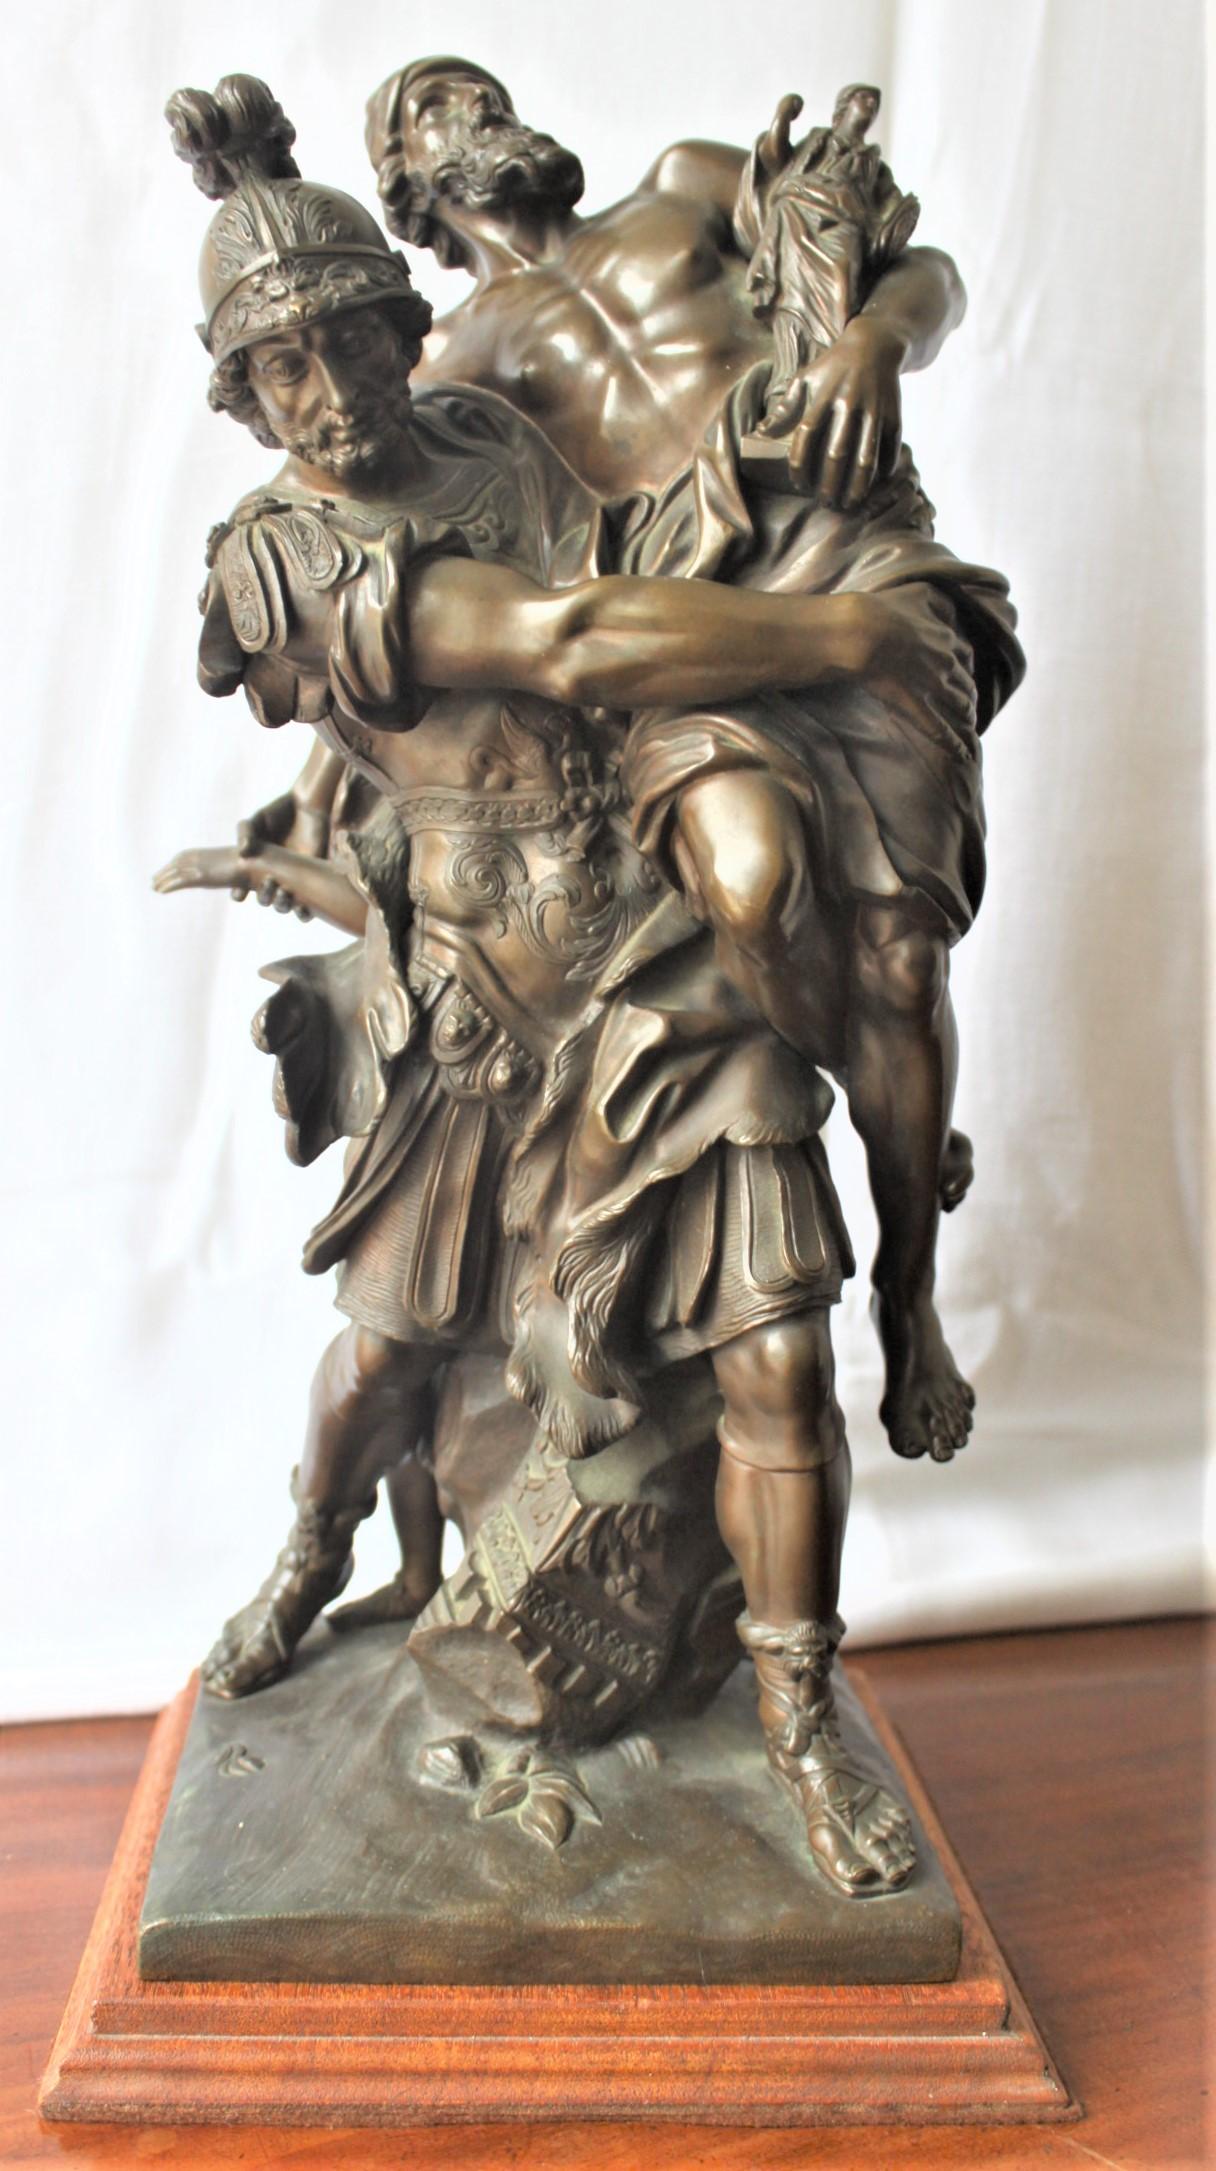 Antique French Bronze Neoclassical Revival Styled Greek Mythological Sculpture For Sale 4